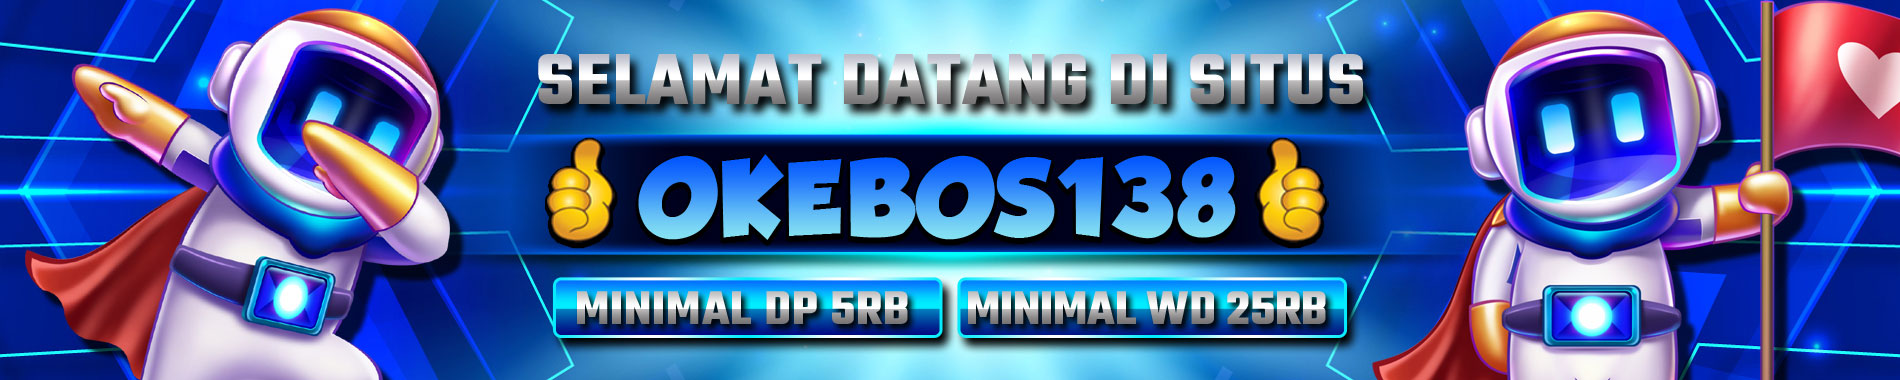 WELCOME TO OKEBOS138